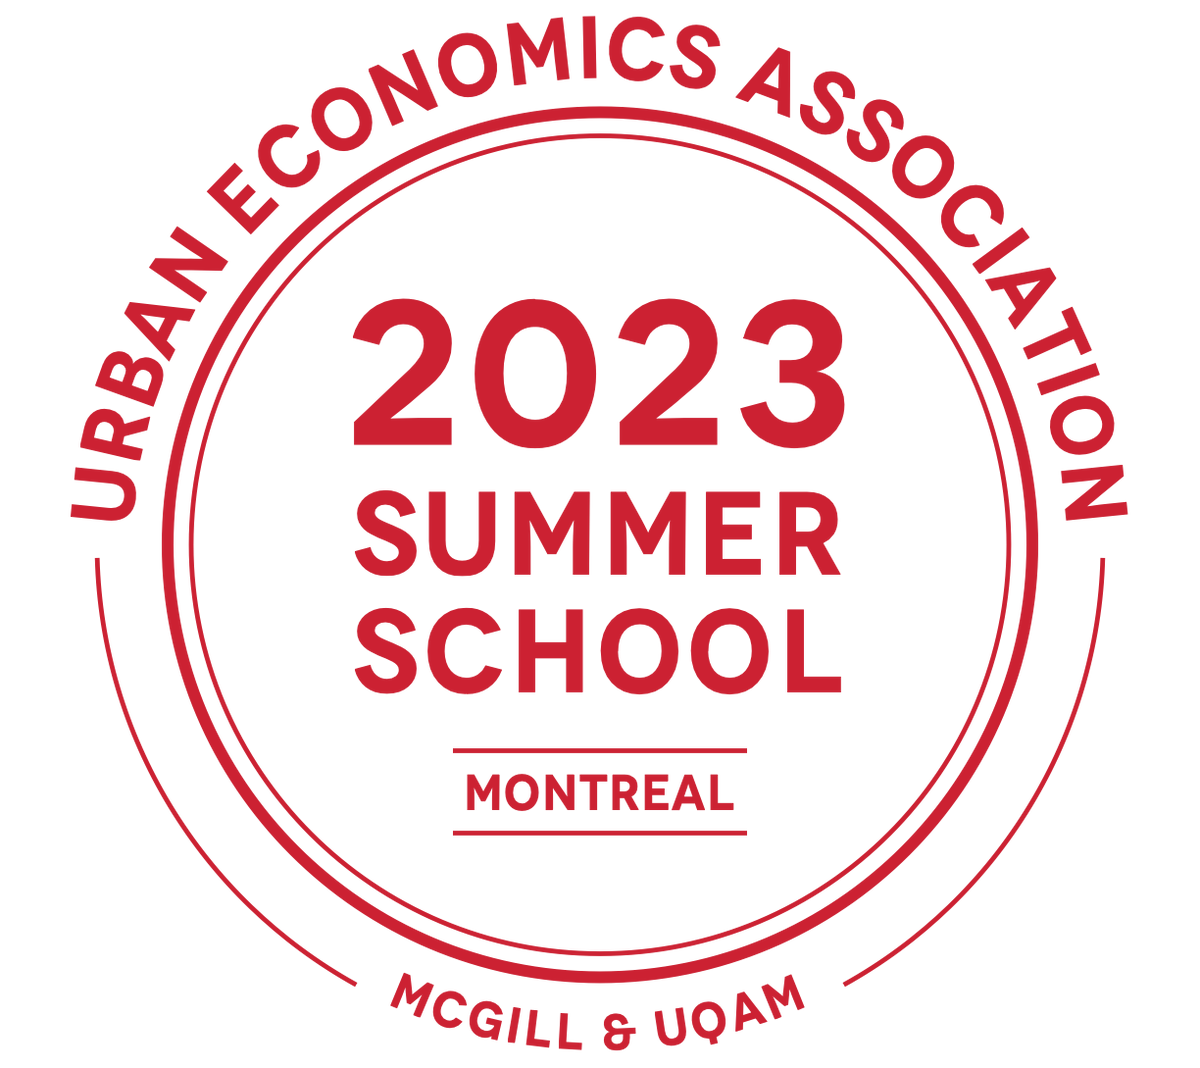 PhD students interested in urban economics: Apply to join us in Montreal on May 29-31 for summer school. Learn from leading scholars, including @marcogleznav & @MilenaAlmagro. Get feedback on your research and meet other urban economists. urbaneconomics.org/workshops/summ…